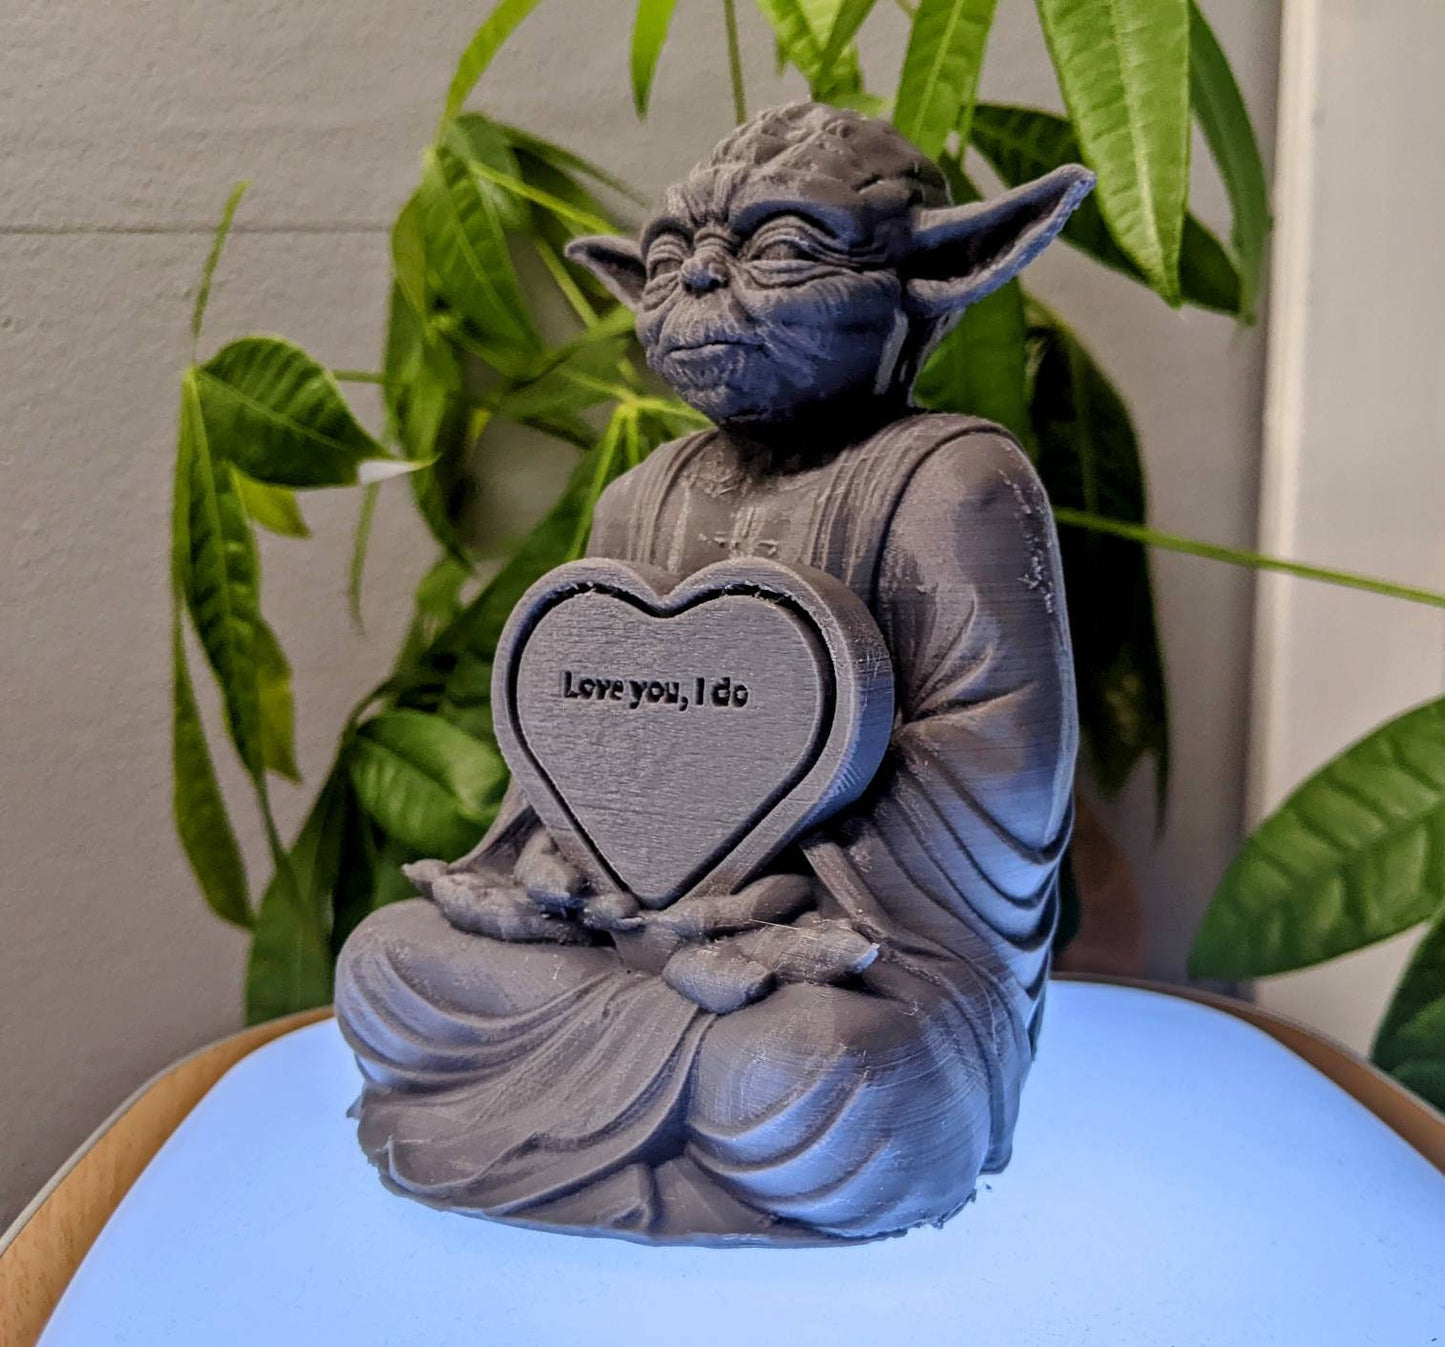 New Yoda Buddha Figure With Heart inspired by Star Wars